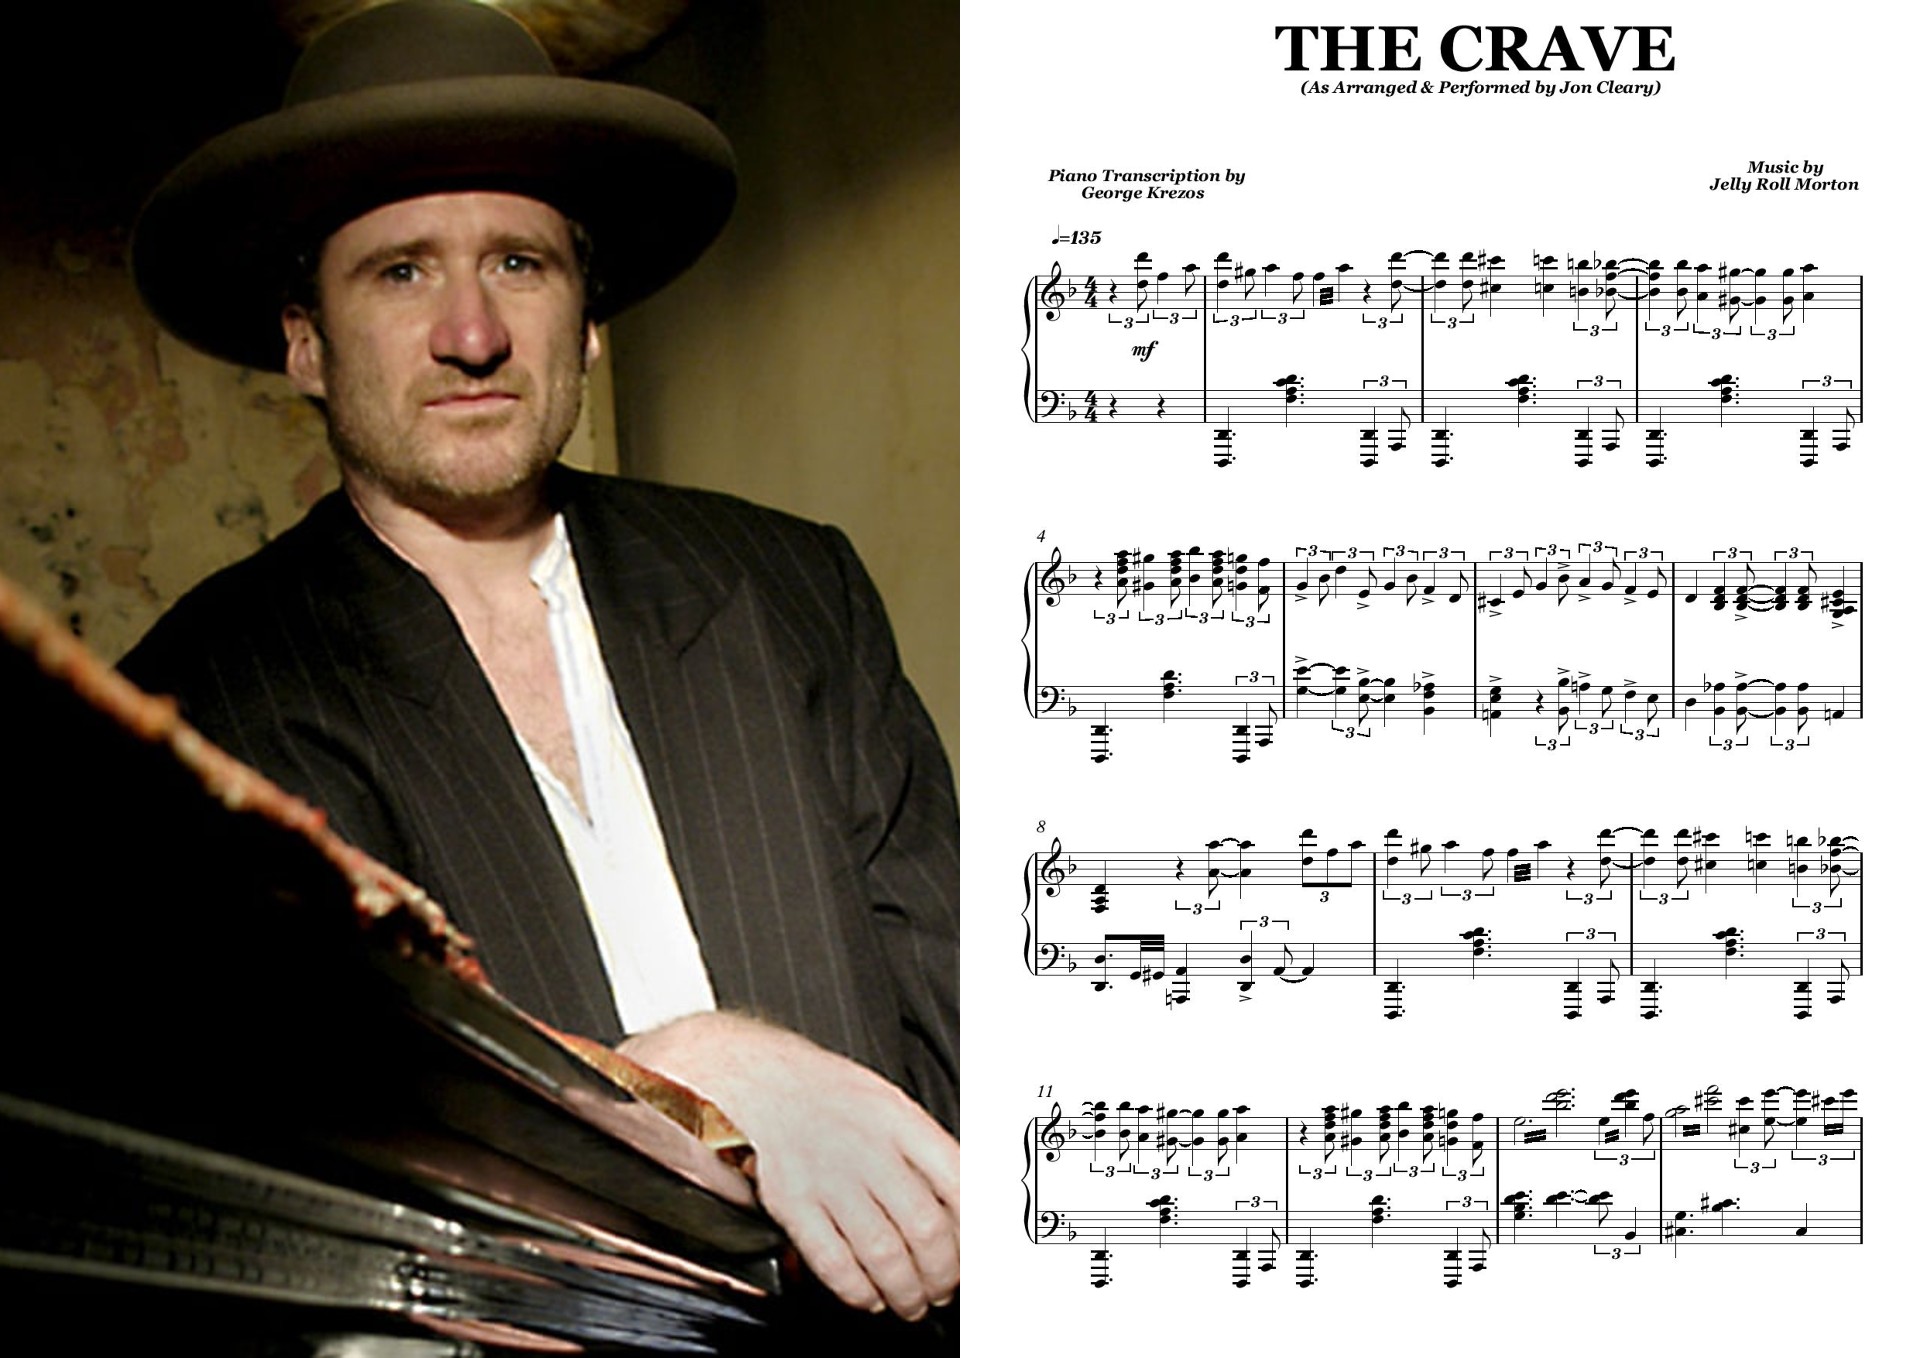 The Crave (as arr. & played by Jon Cleary).jpg